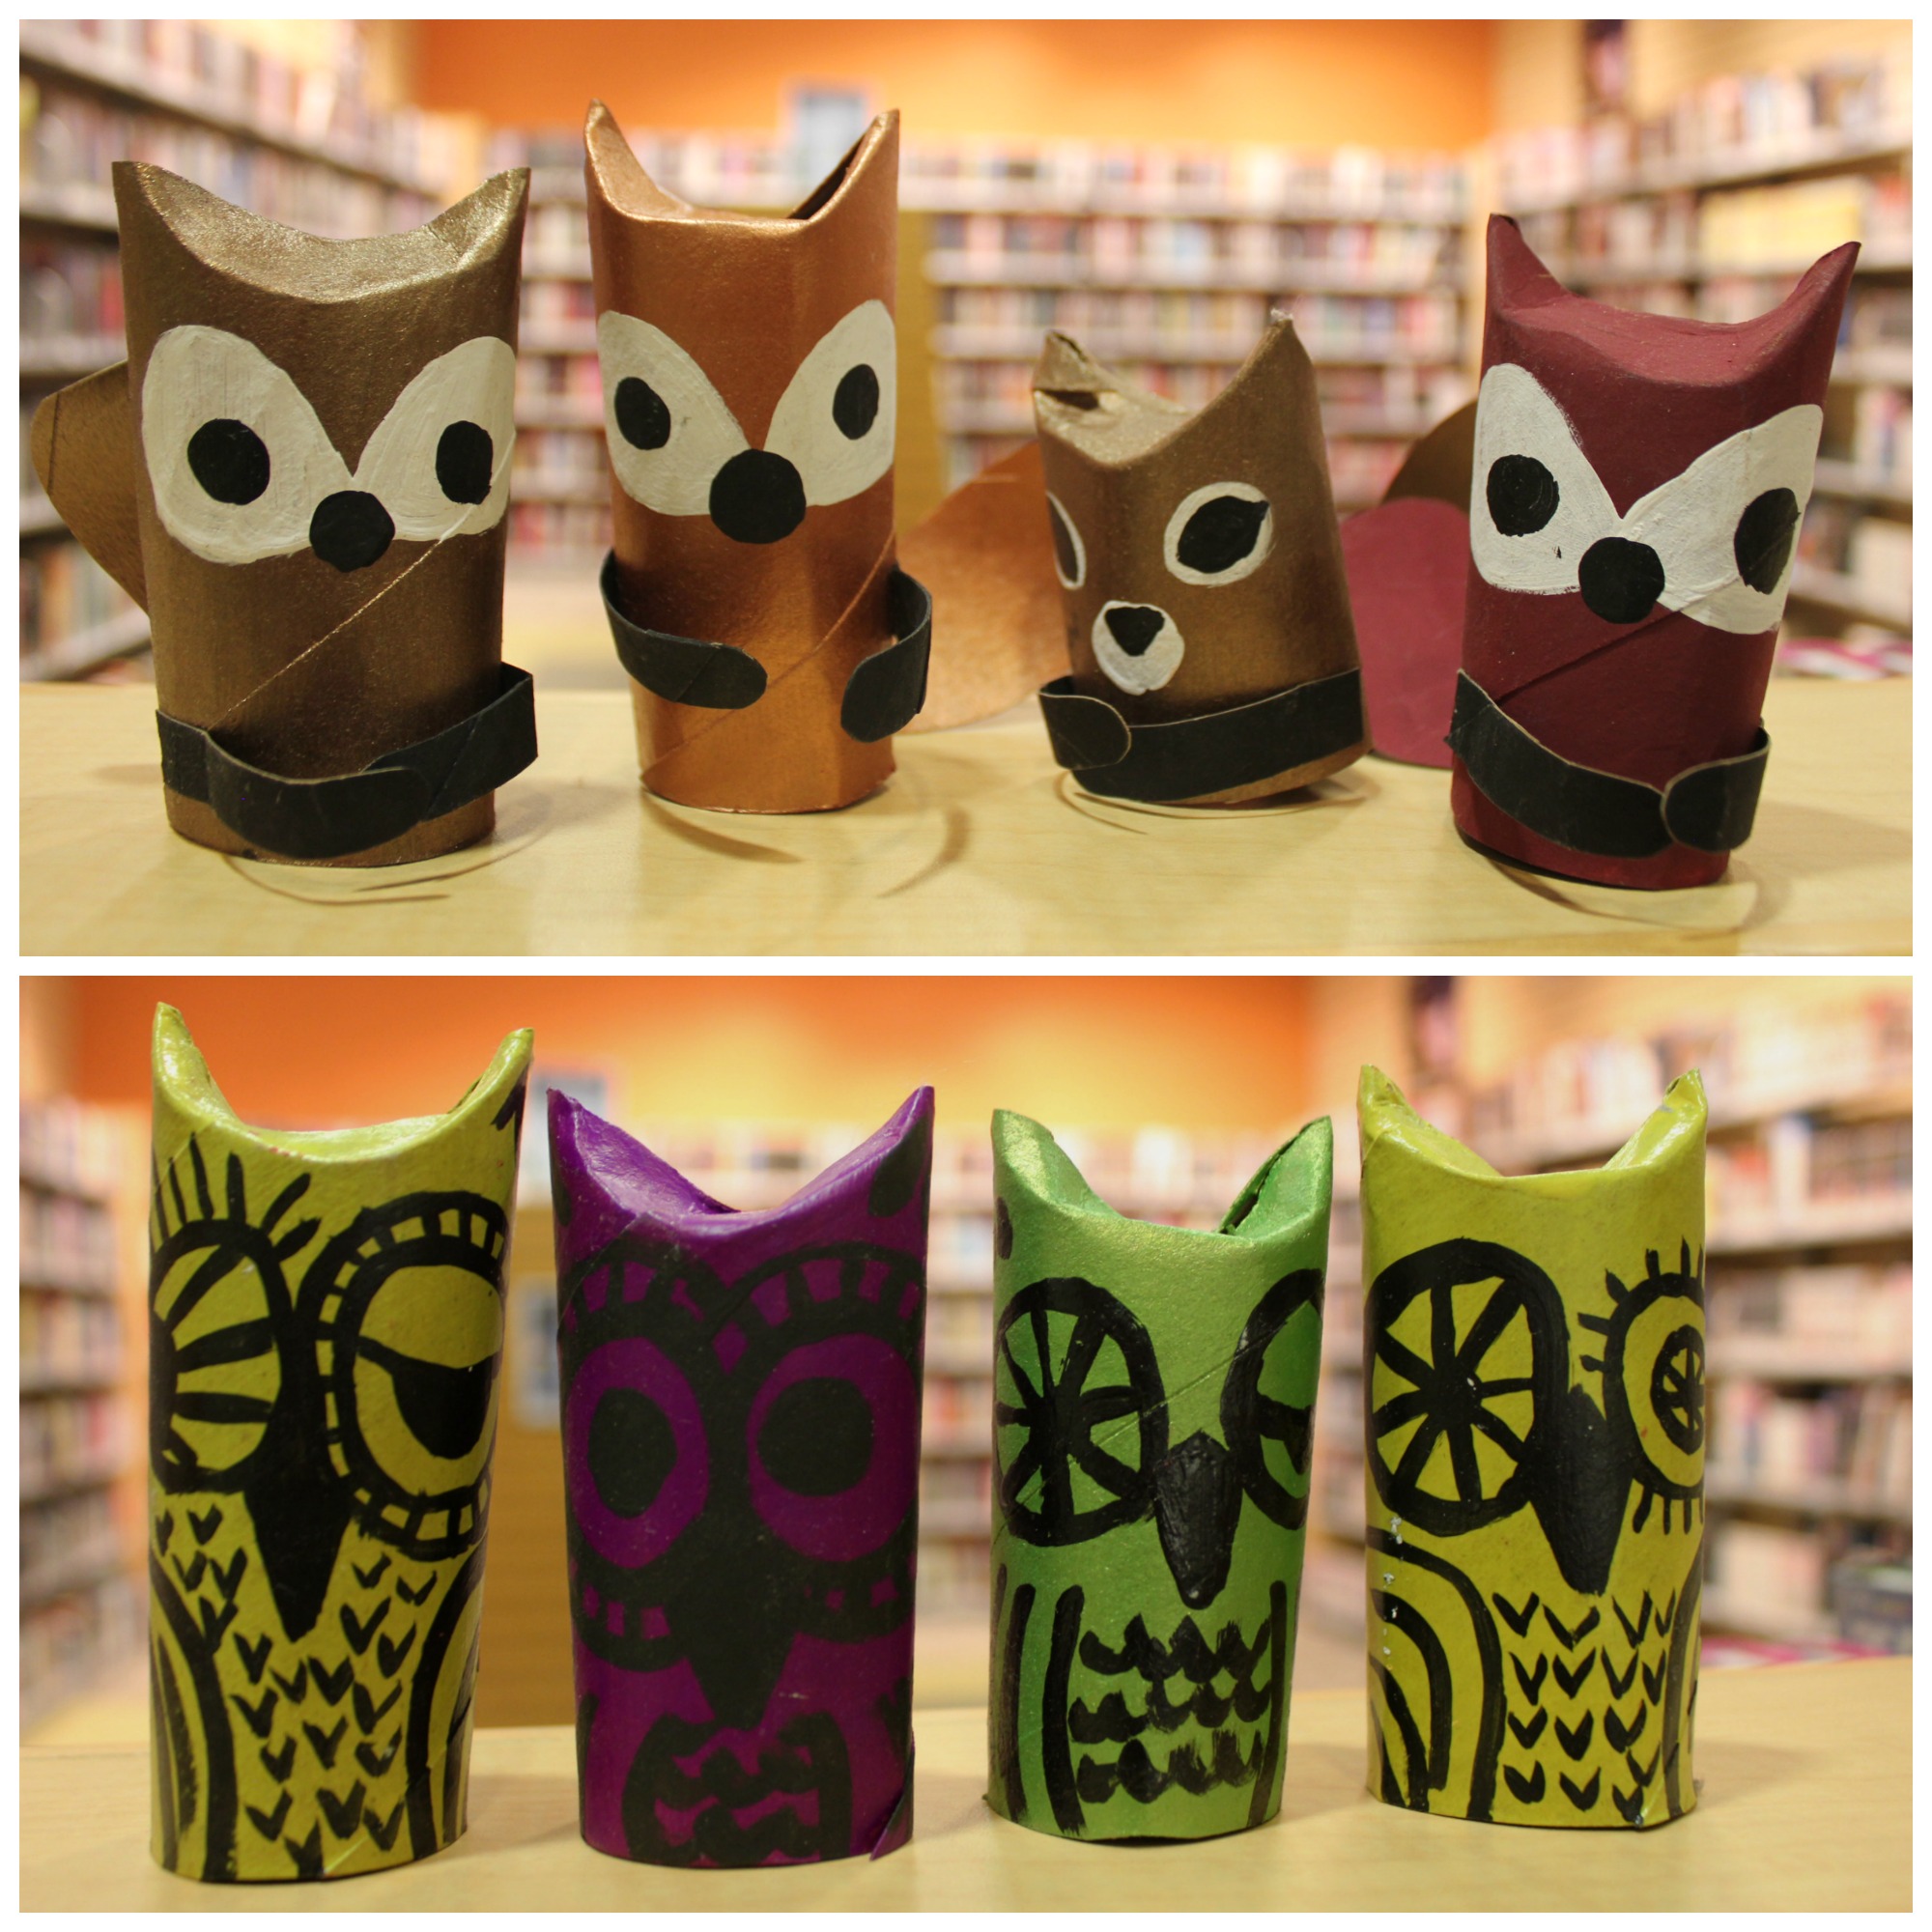 Paper Tube Woodland Animals | Fox River Valley Public Library